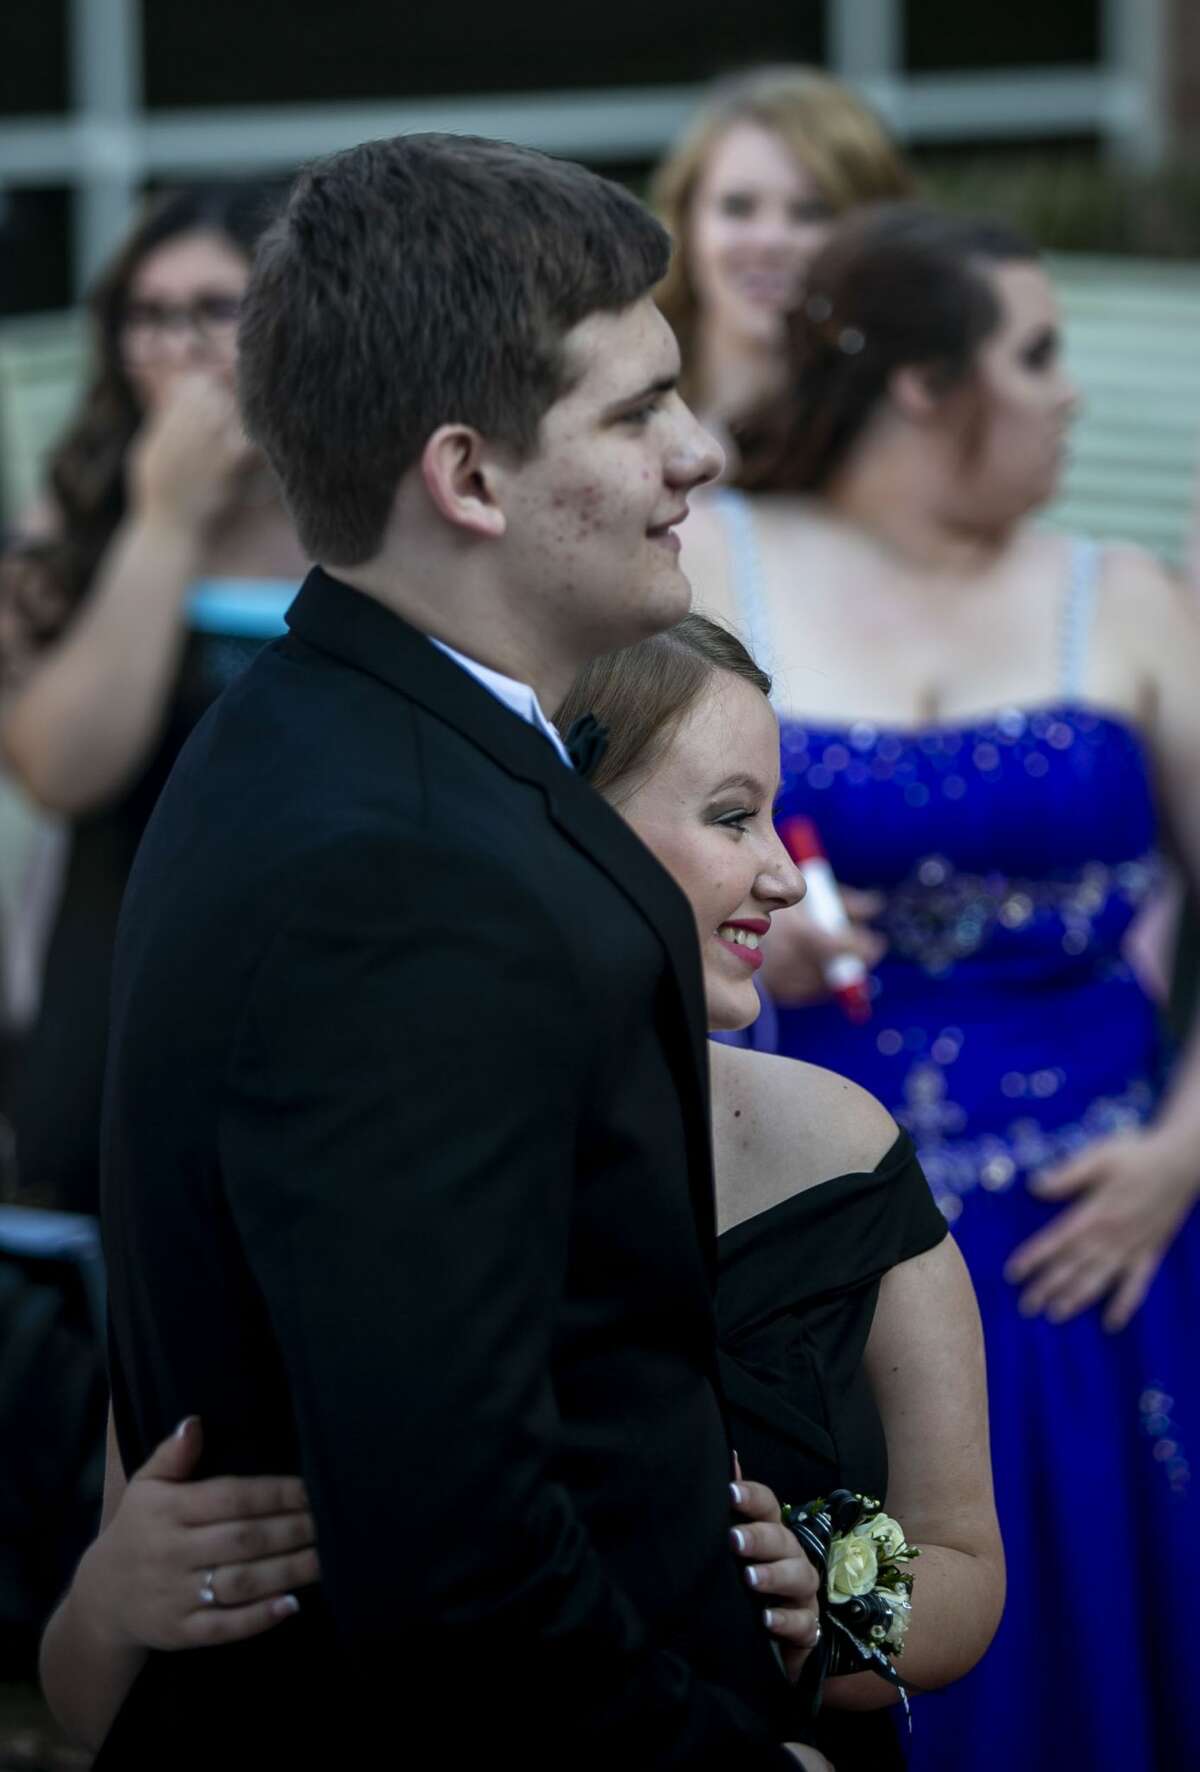 Beau Mayberry, 16, poses with his date Ahlivia Hodges, 17, both of Beaverton, during the Beaverton High School prom held at The H Hotel in downtown Midland on Saturday, May 4, 2019. (Josie Norris/for the Daily News)